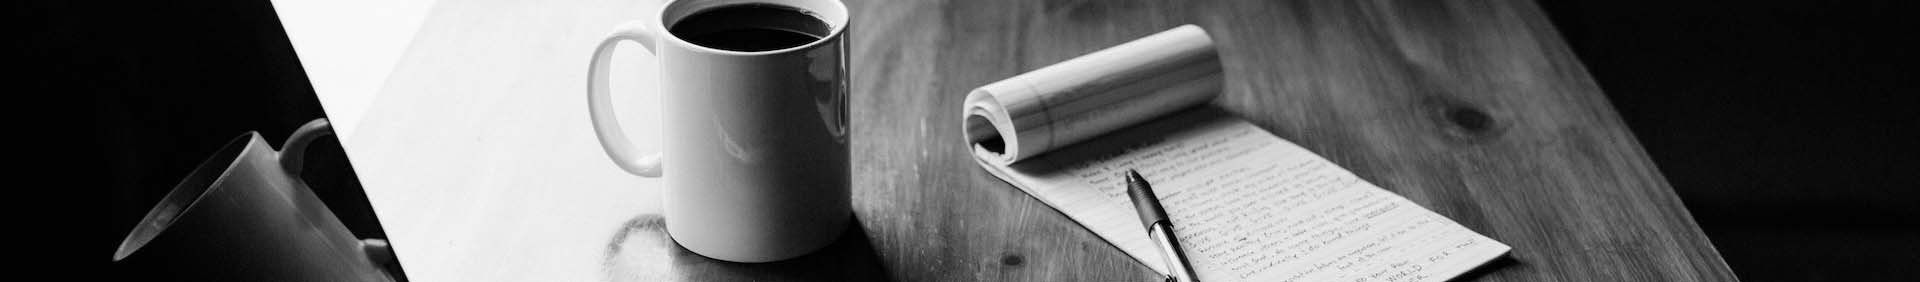 A photo of a coffee mug, pad of paper, and pen sitting on a desk.